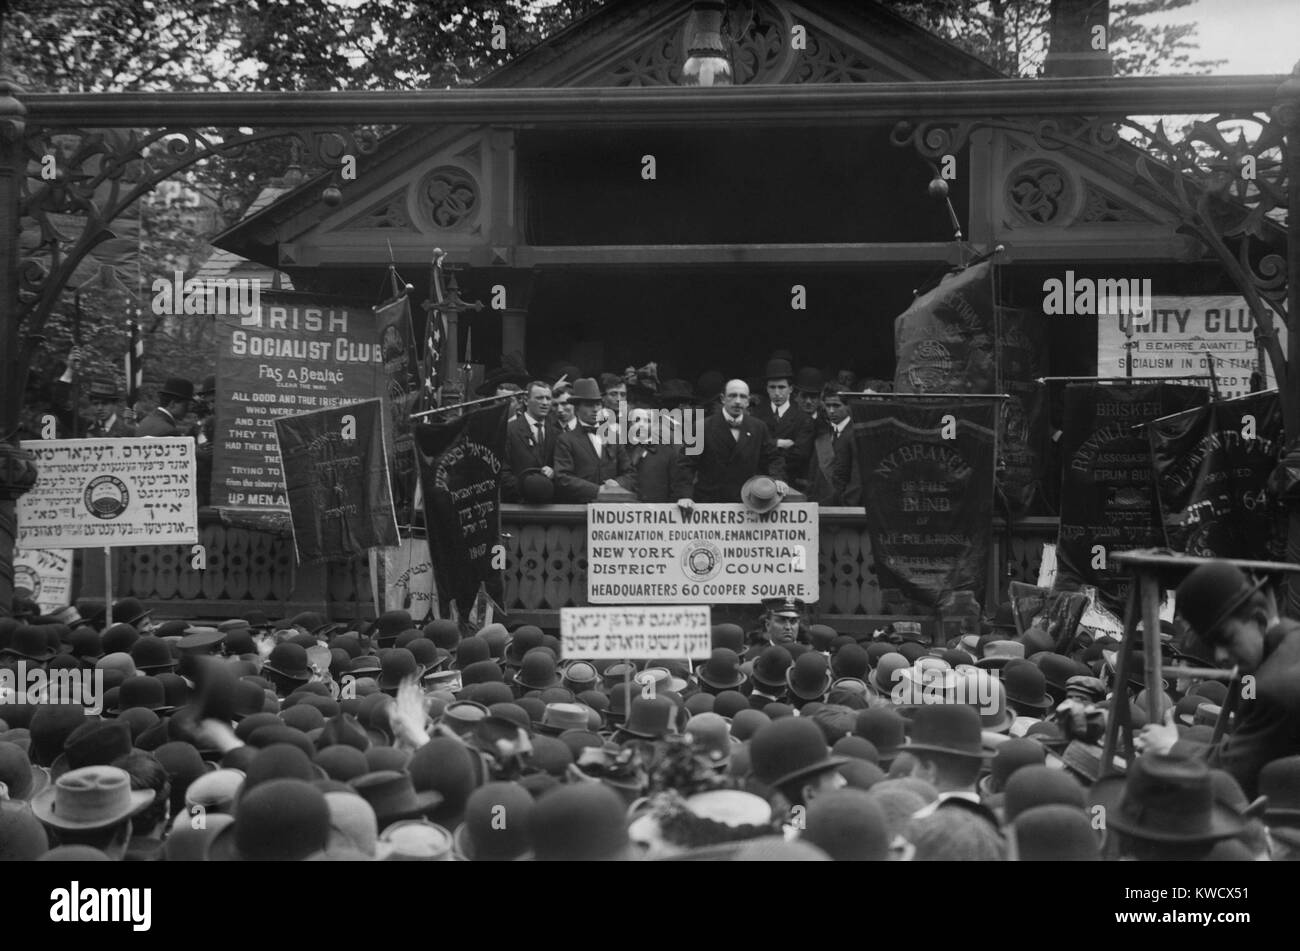 Alexander Berkman speaks in Union Square at a May Day Rally, May 1, 1908. IWW signs dominate those of other socialist groups such as: Irish Socialist Club; The Bund of Lithuania, Poland and Russia; and Jewish groups (BSLOC 2017 2 172) Stock Photo